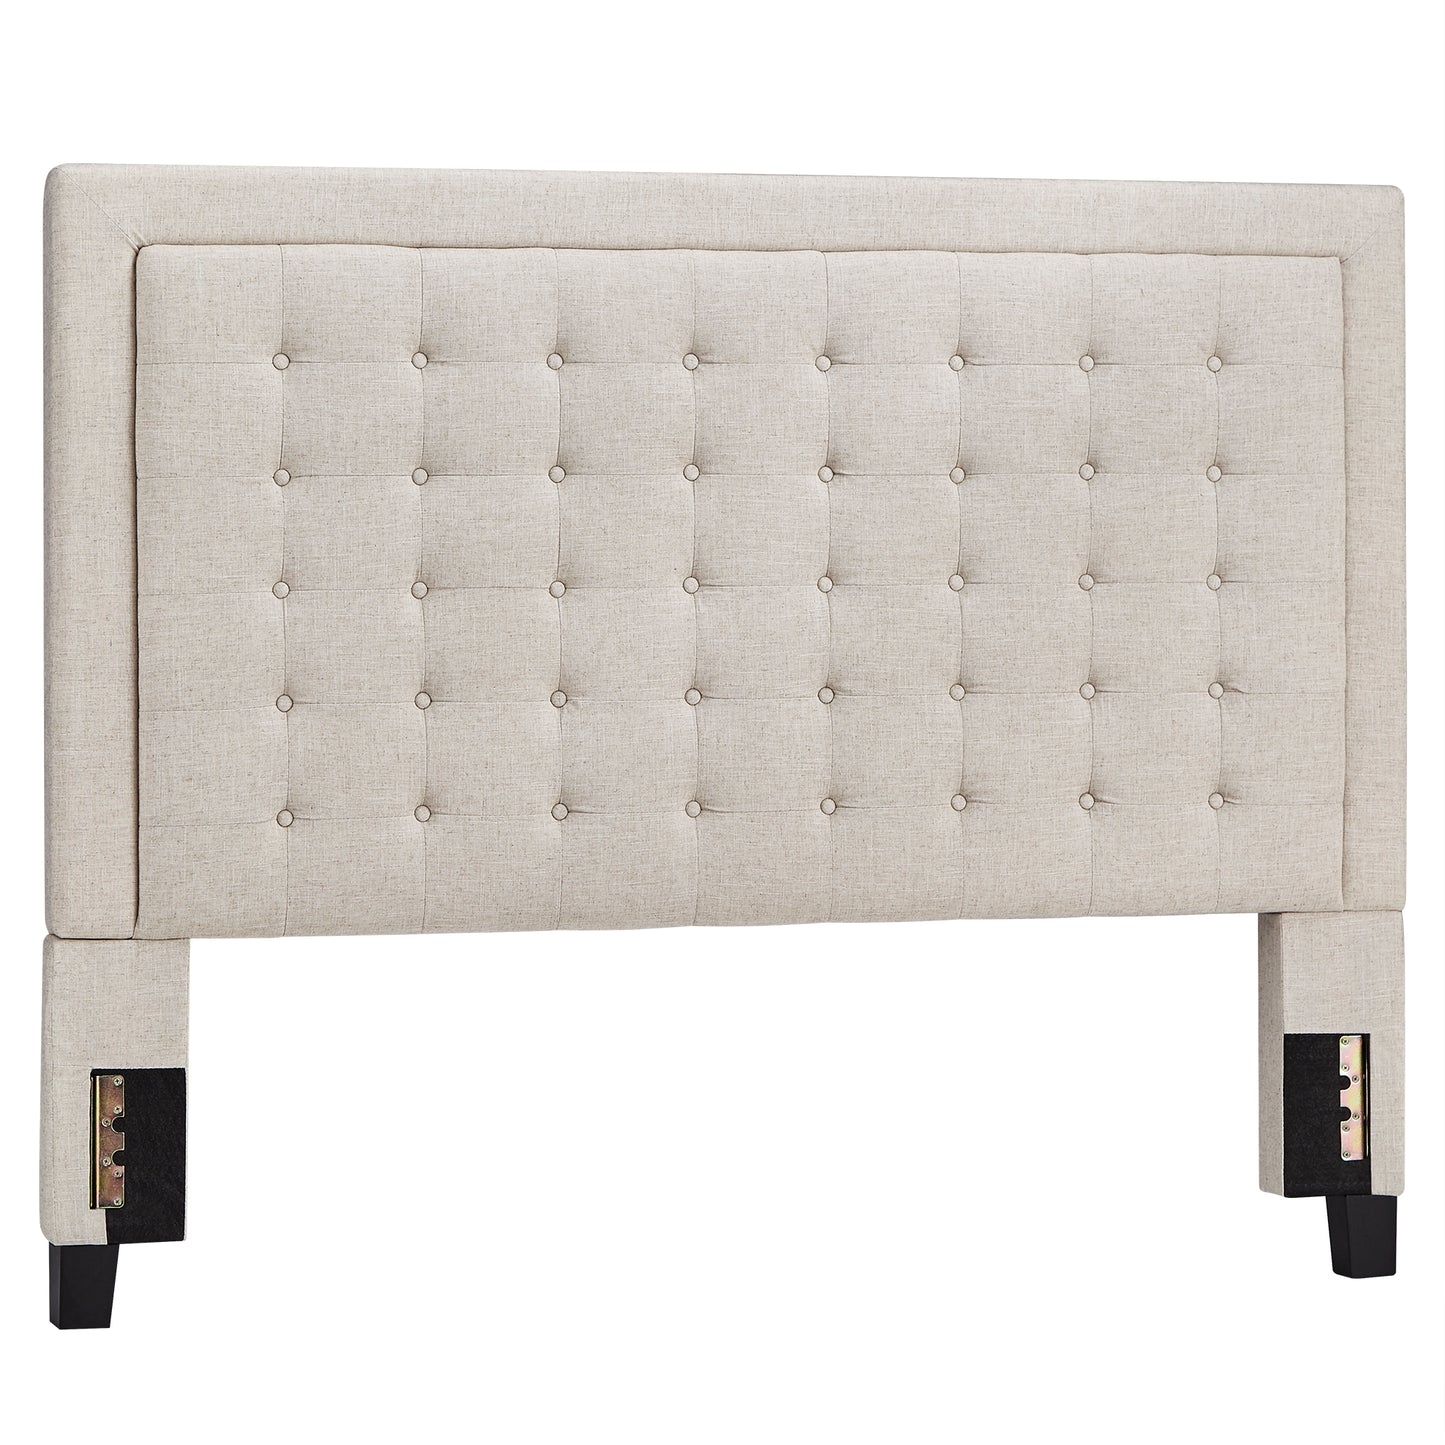 Square Button-Tufted Upholstered Headboard - Beige, Queen